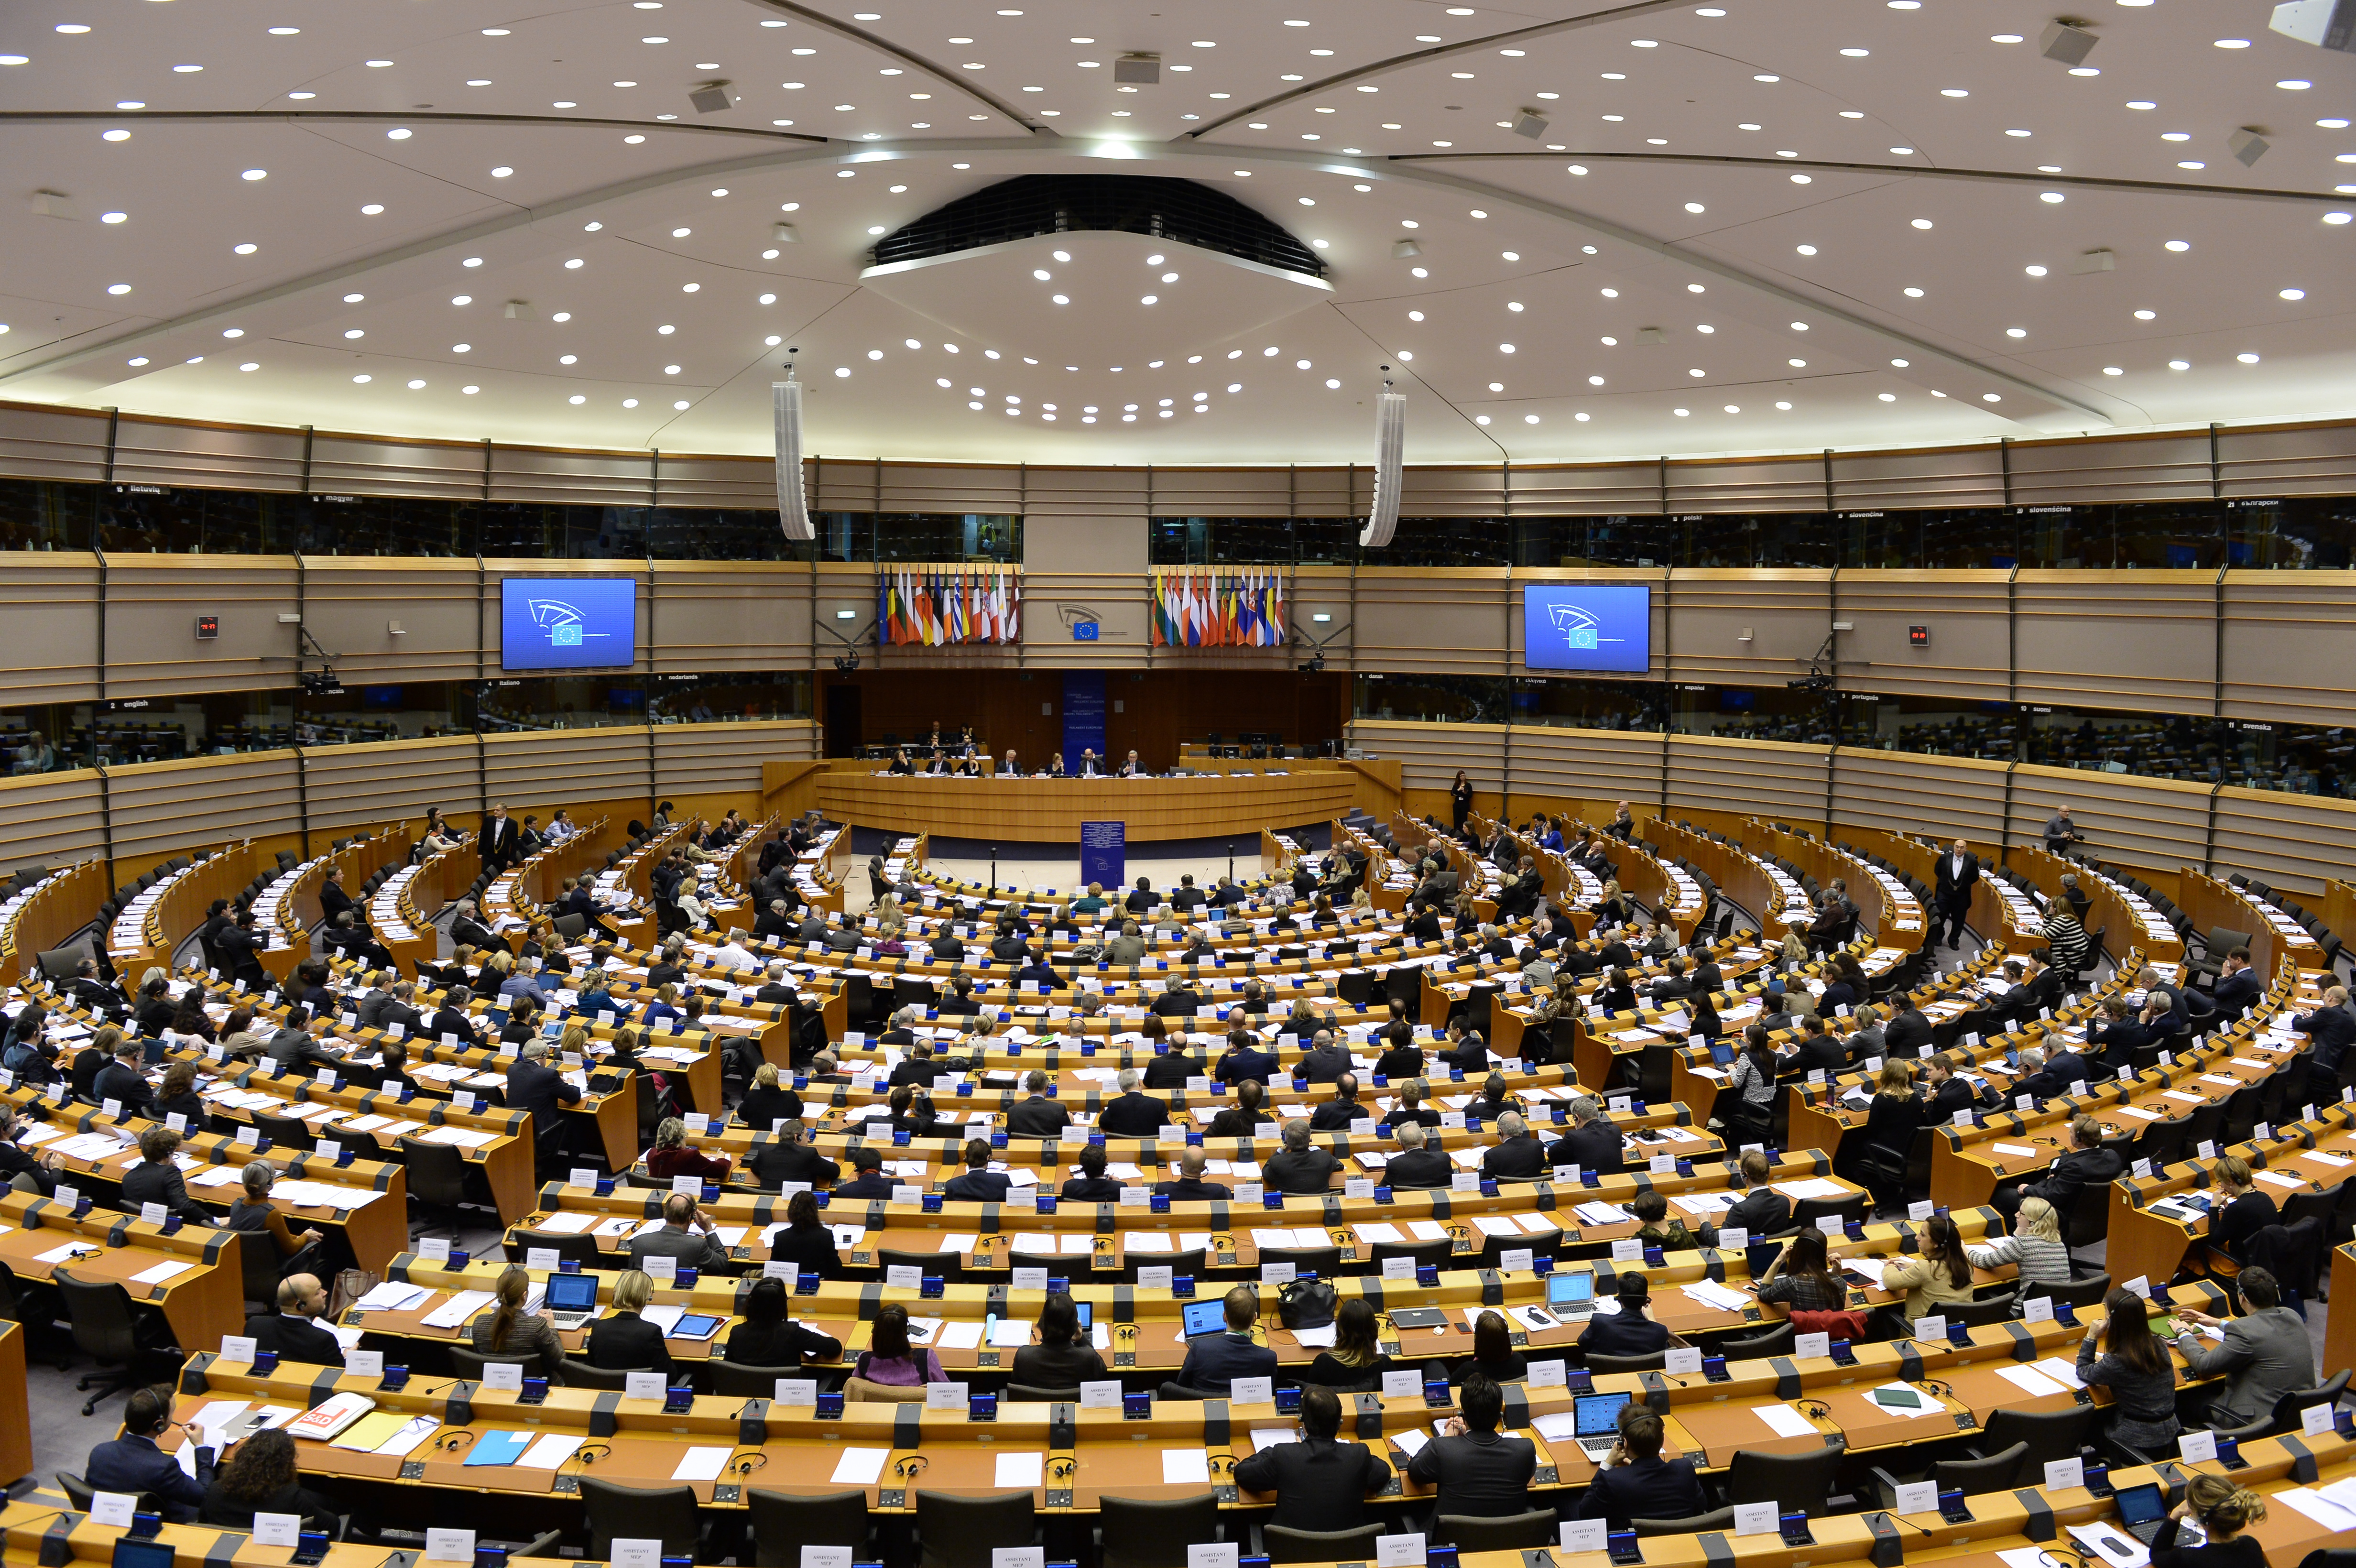 General view of the European Parliament hemicycle in Brussels Energy Post